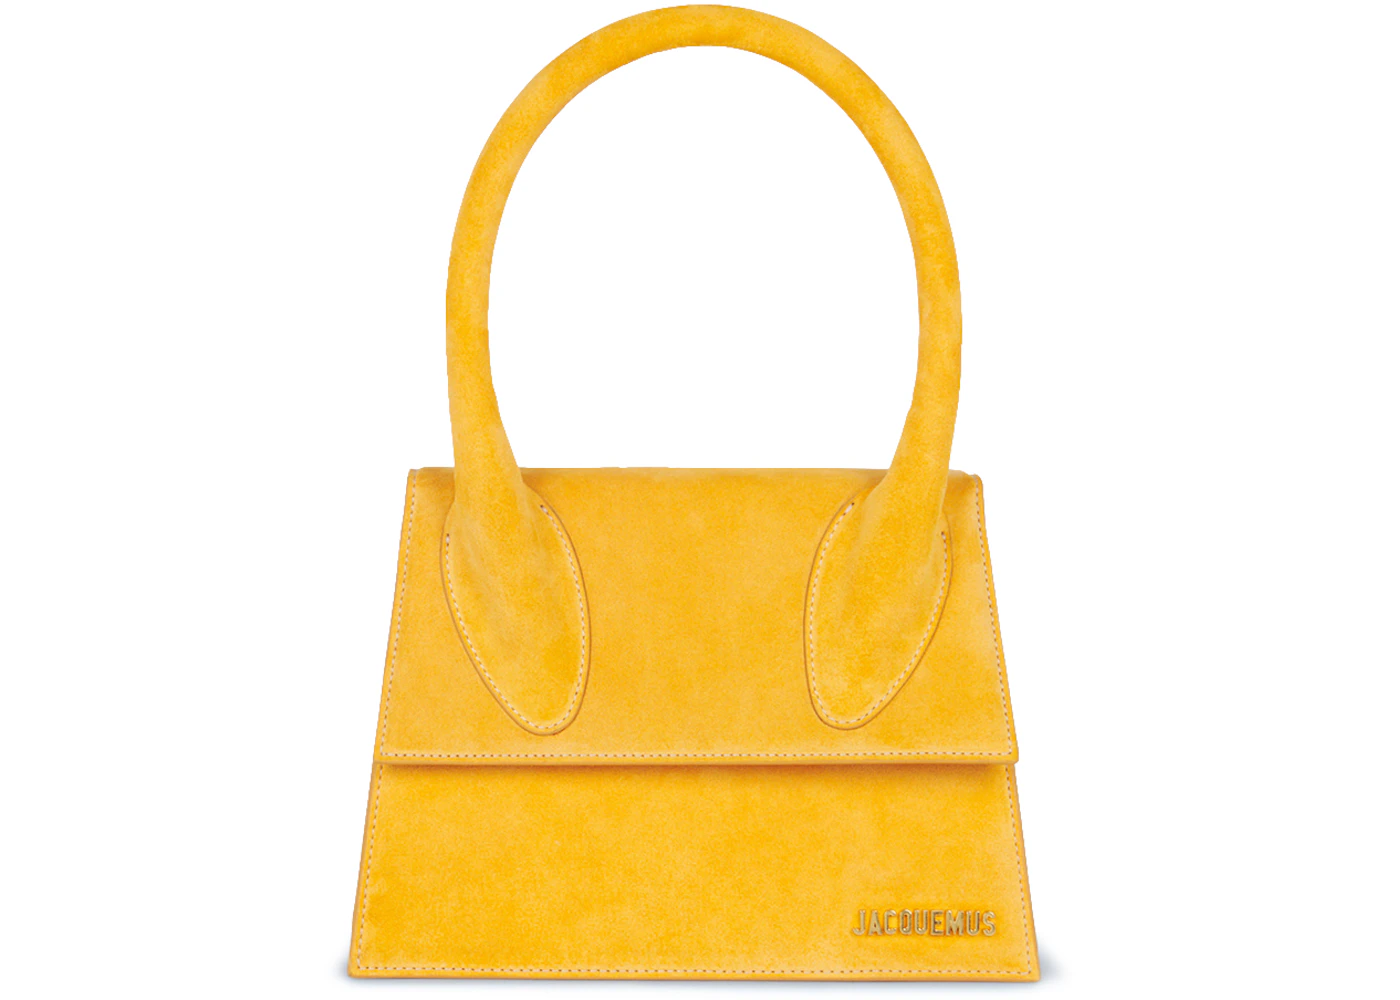 Jacquemus Le Grand Chiquito Large Handbag Orange in Suede Leather with ...